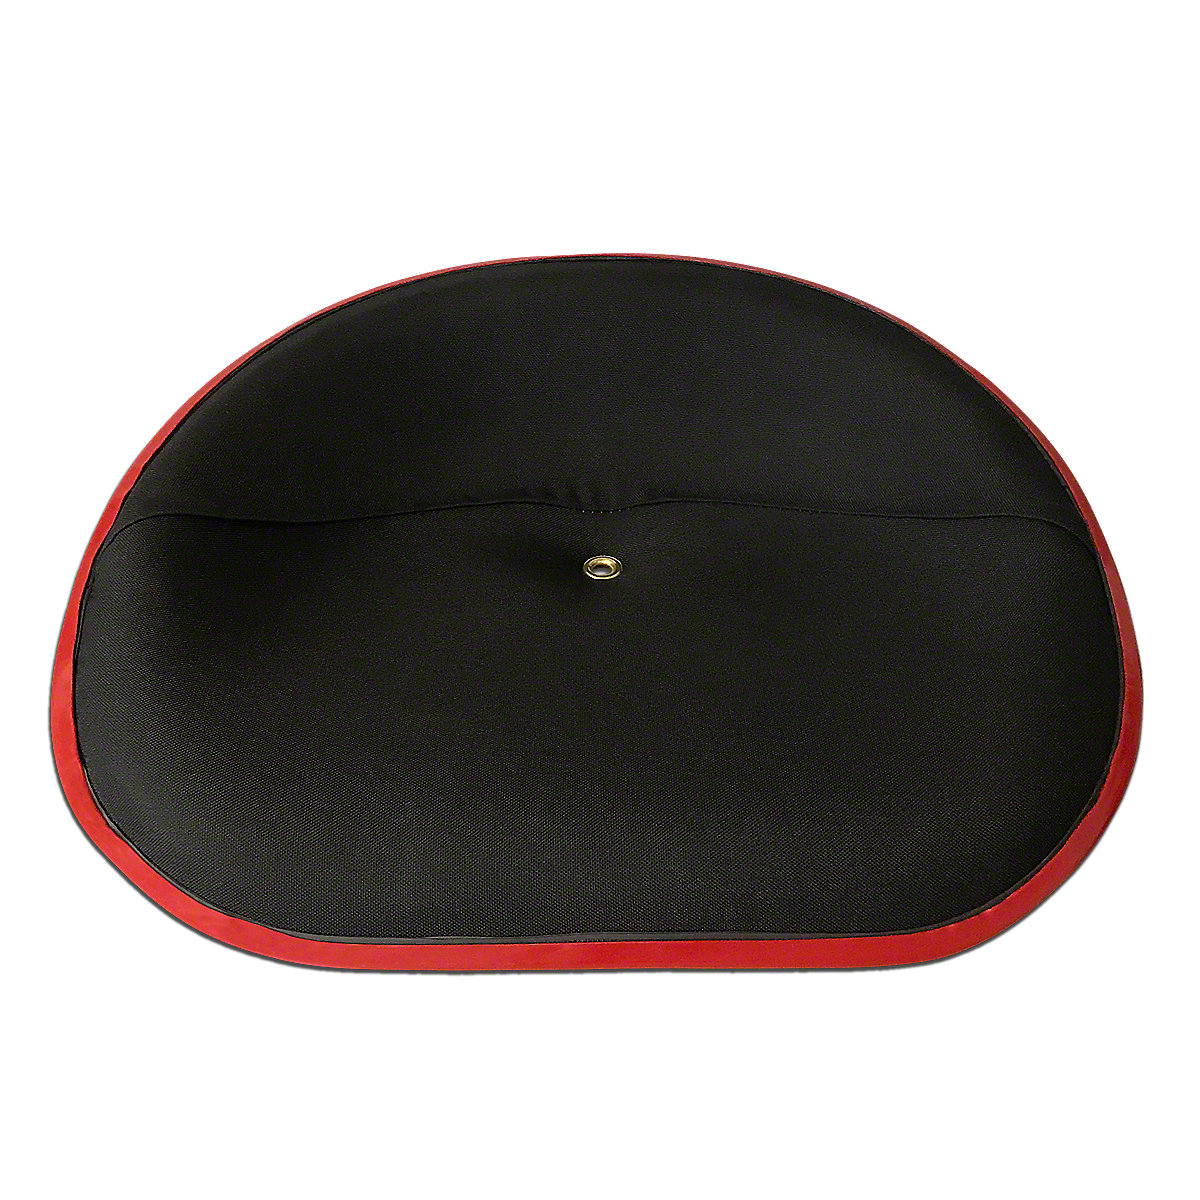 Deluxe Upholstered Seat Pan